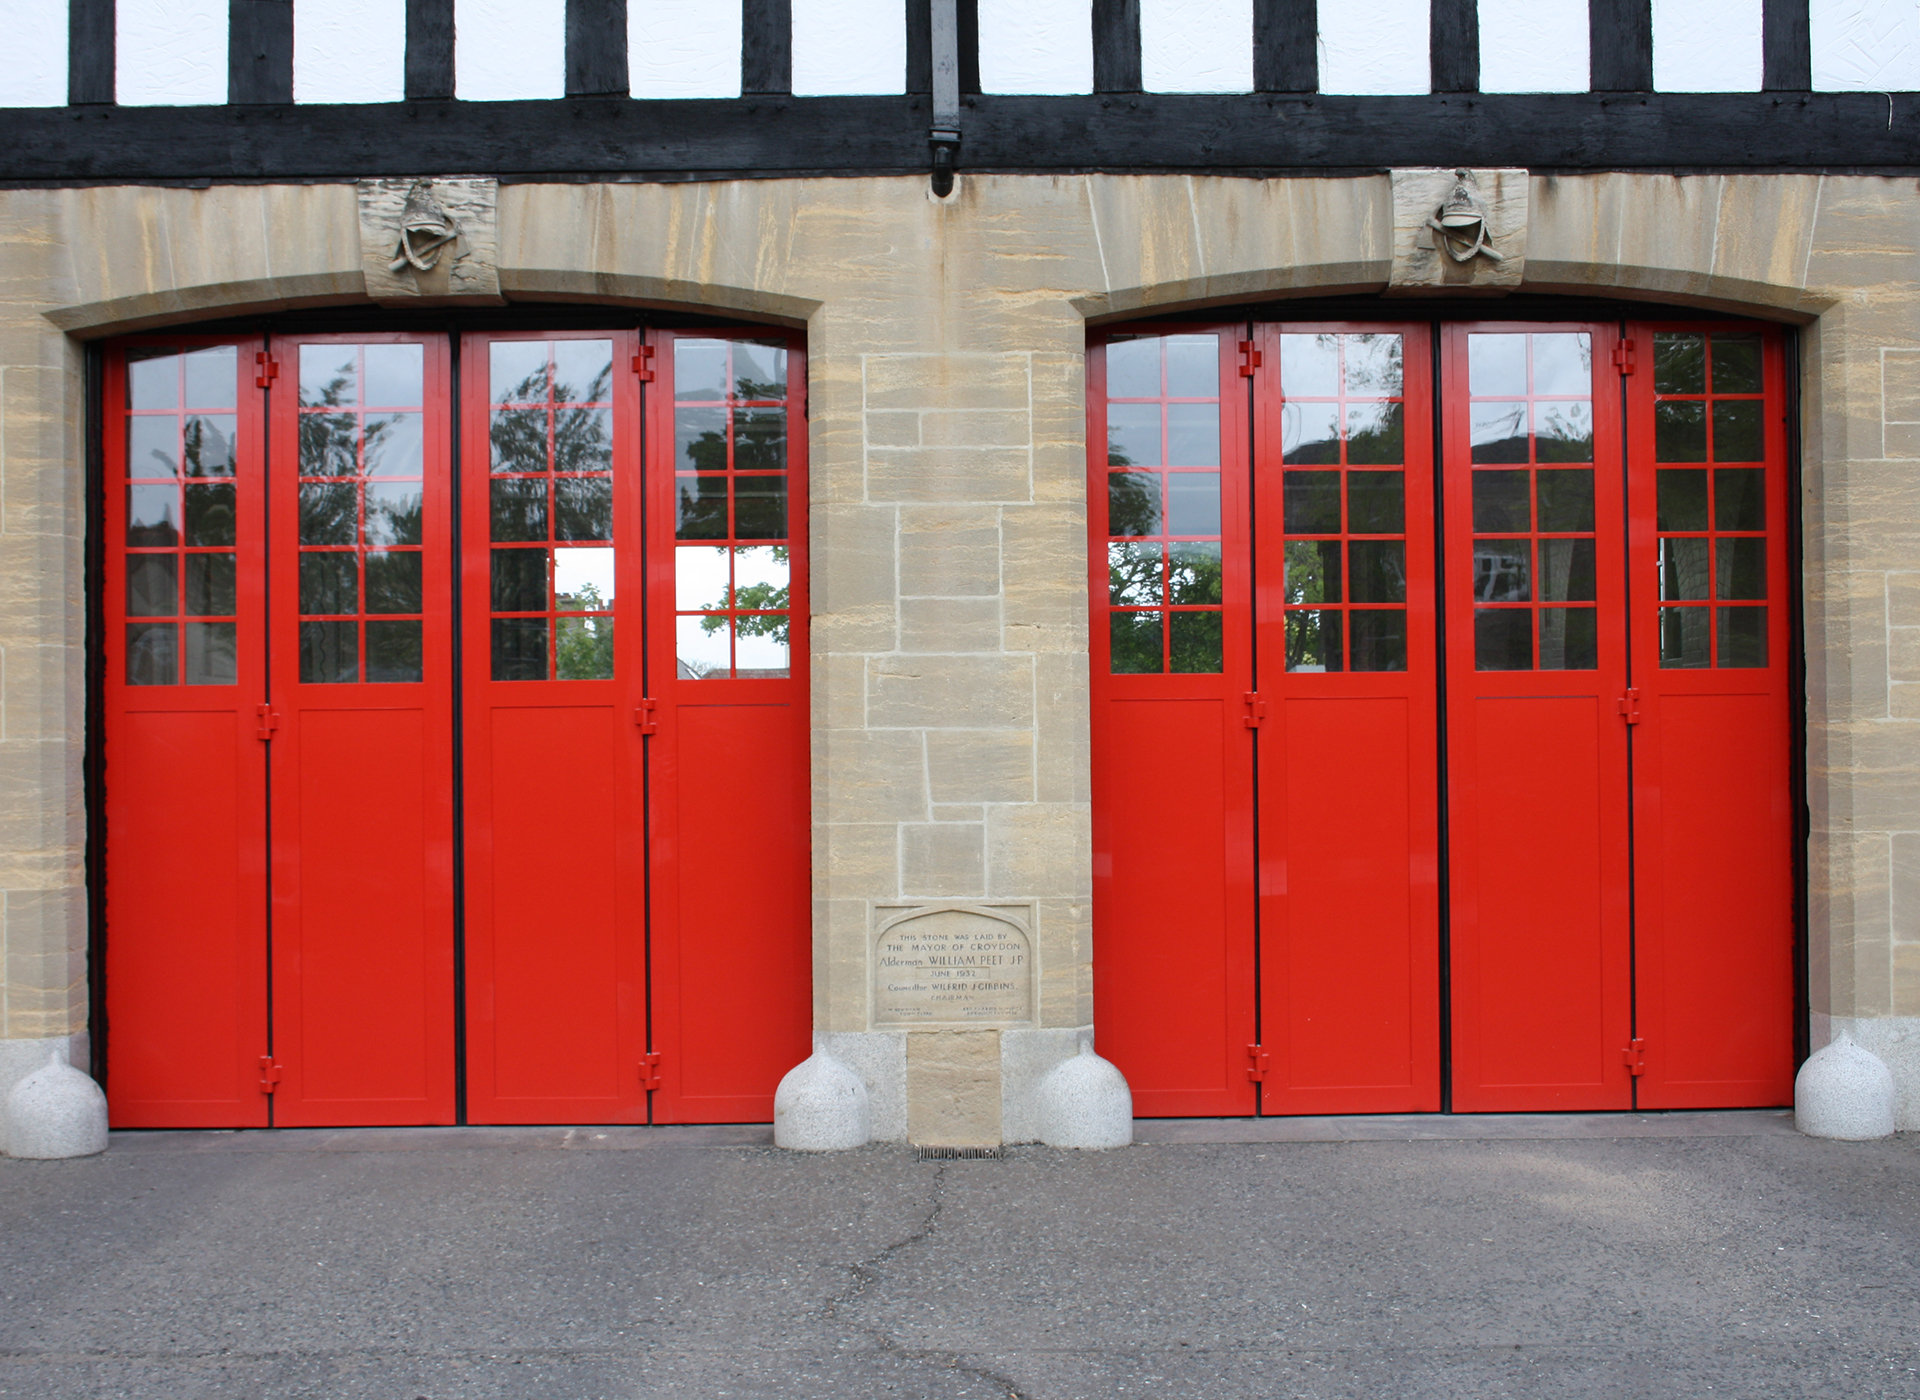 London Fire Brigade – Replacement of appliance bay doors